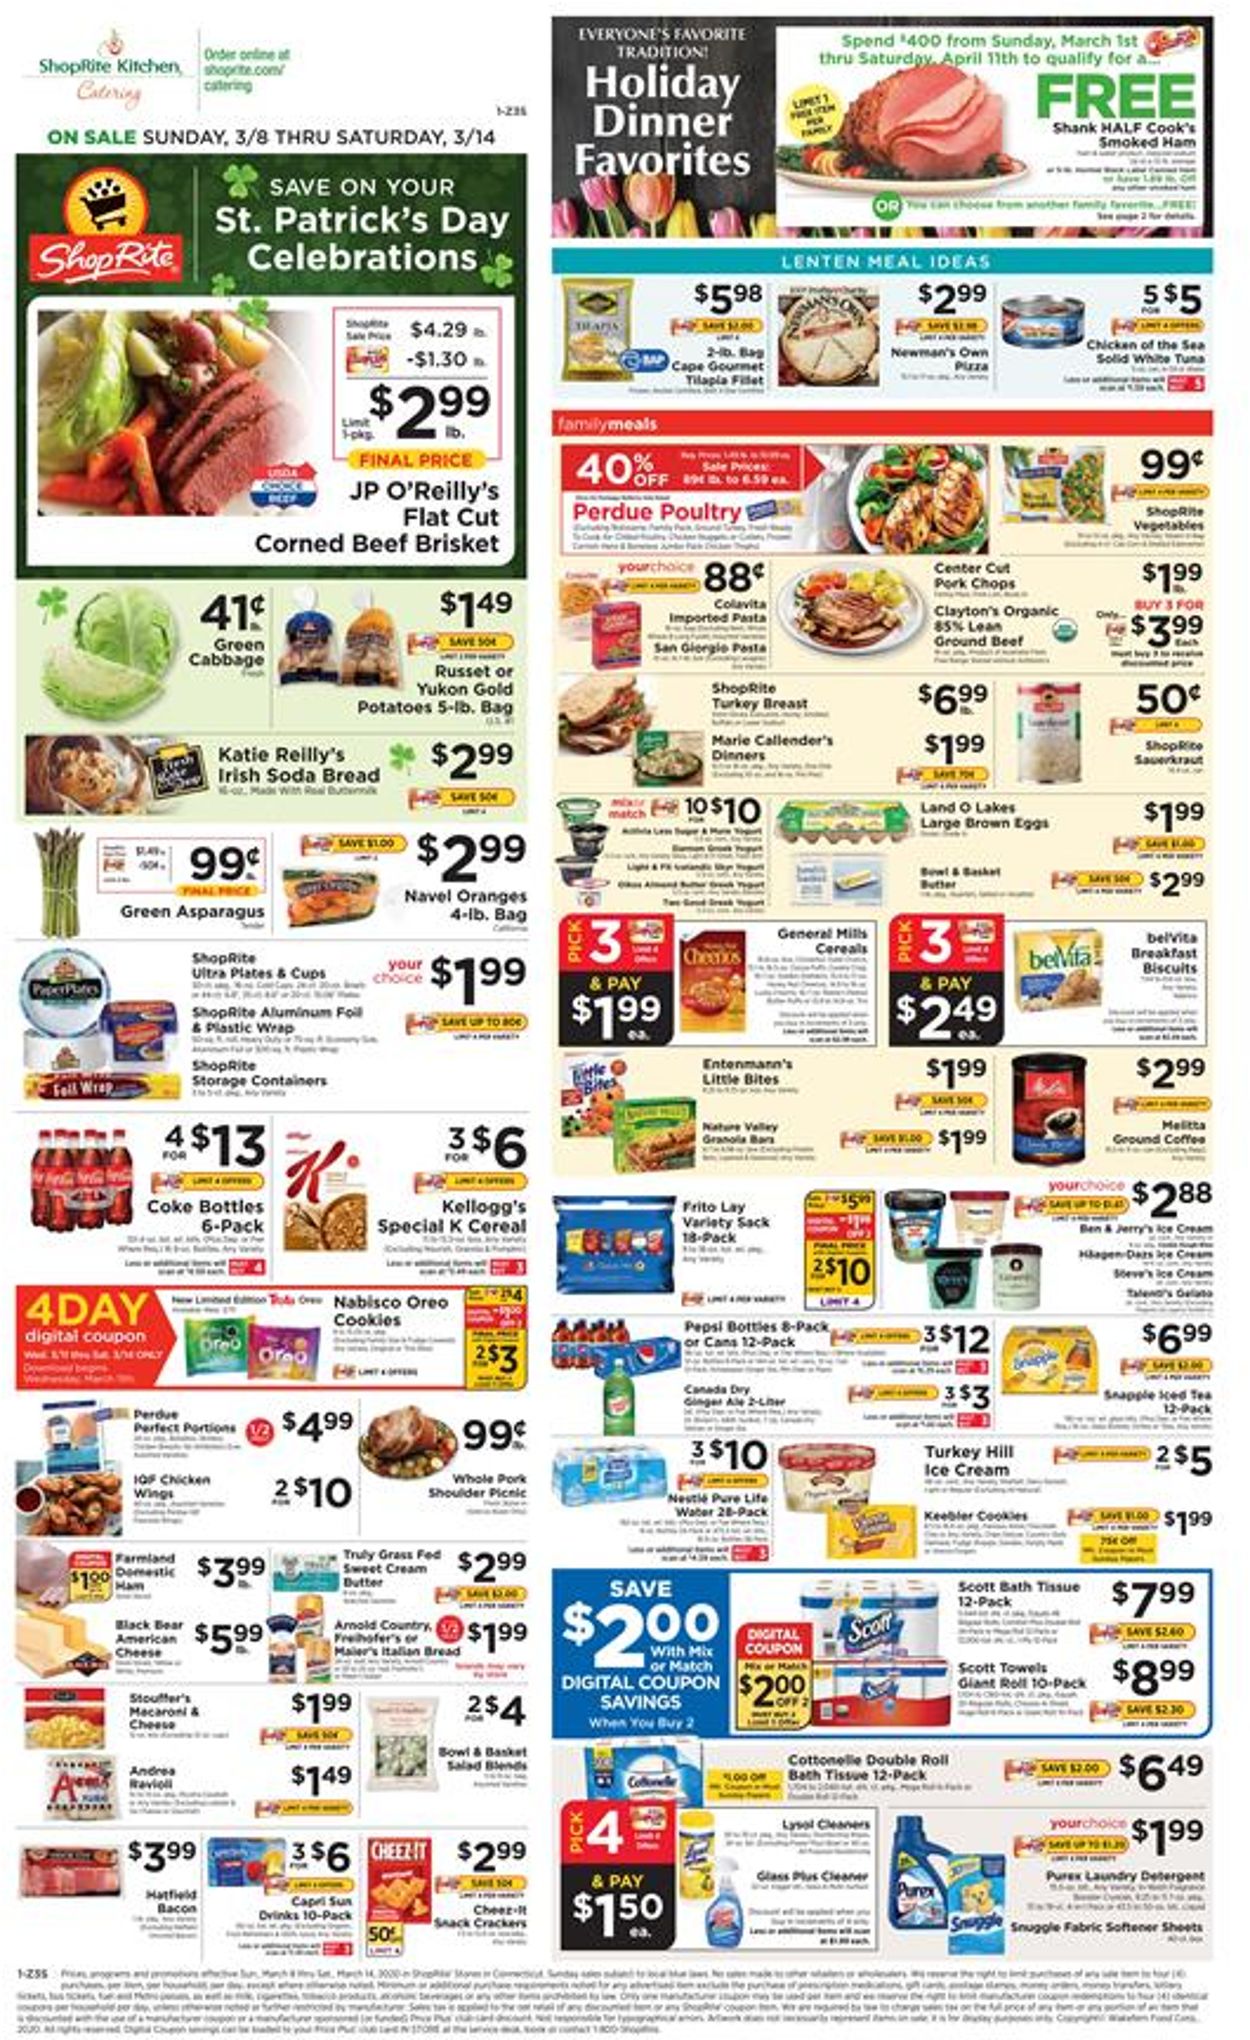 Shoprite Current Weekly Ad 03 08 03 14 2020 Frequent Ads Com